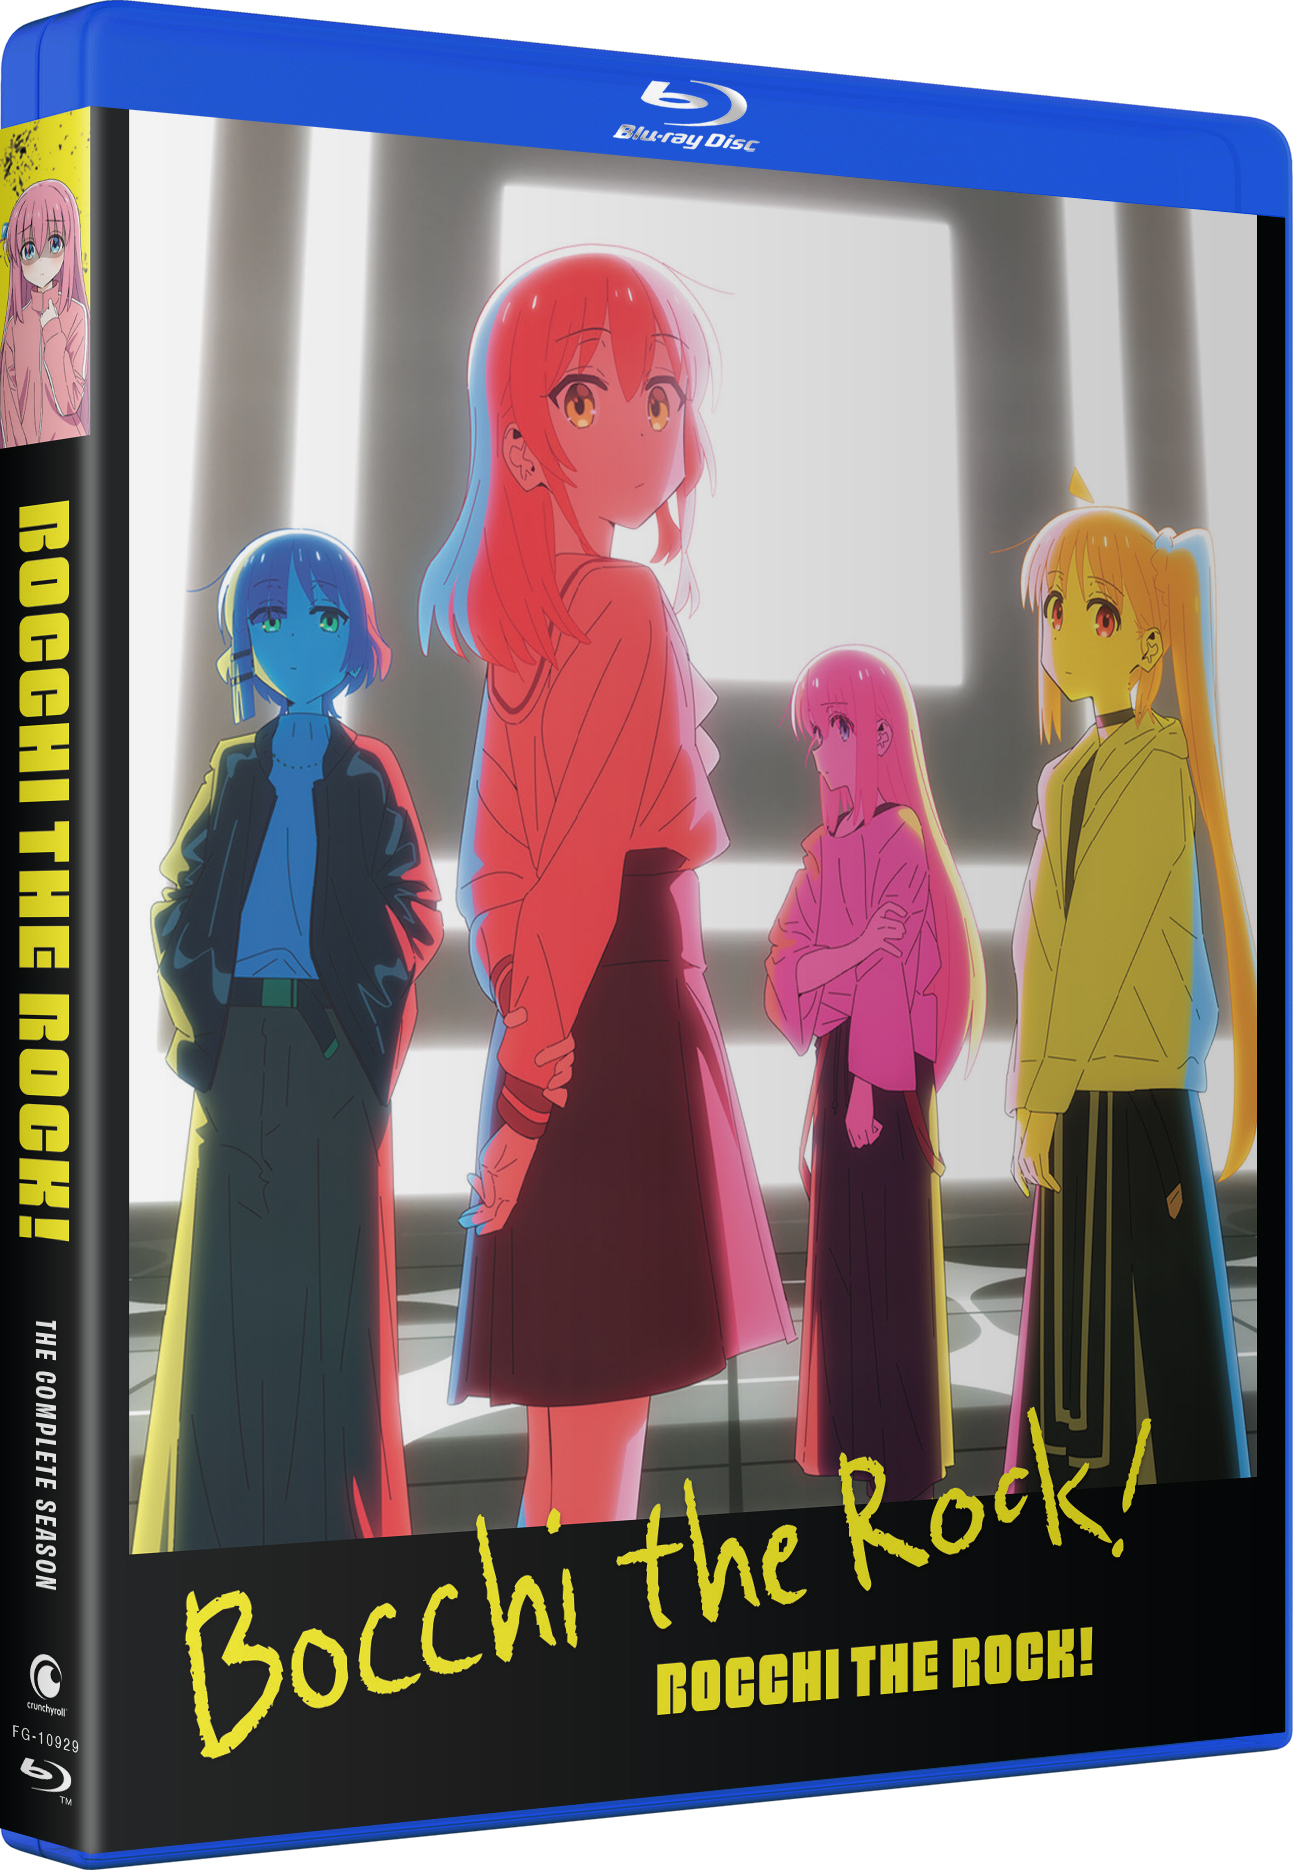 Bocchi the Rock! Chapter 24 Discussion - Forums 